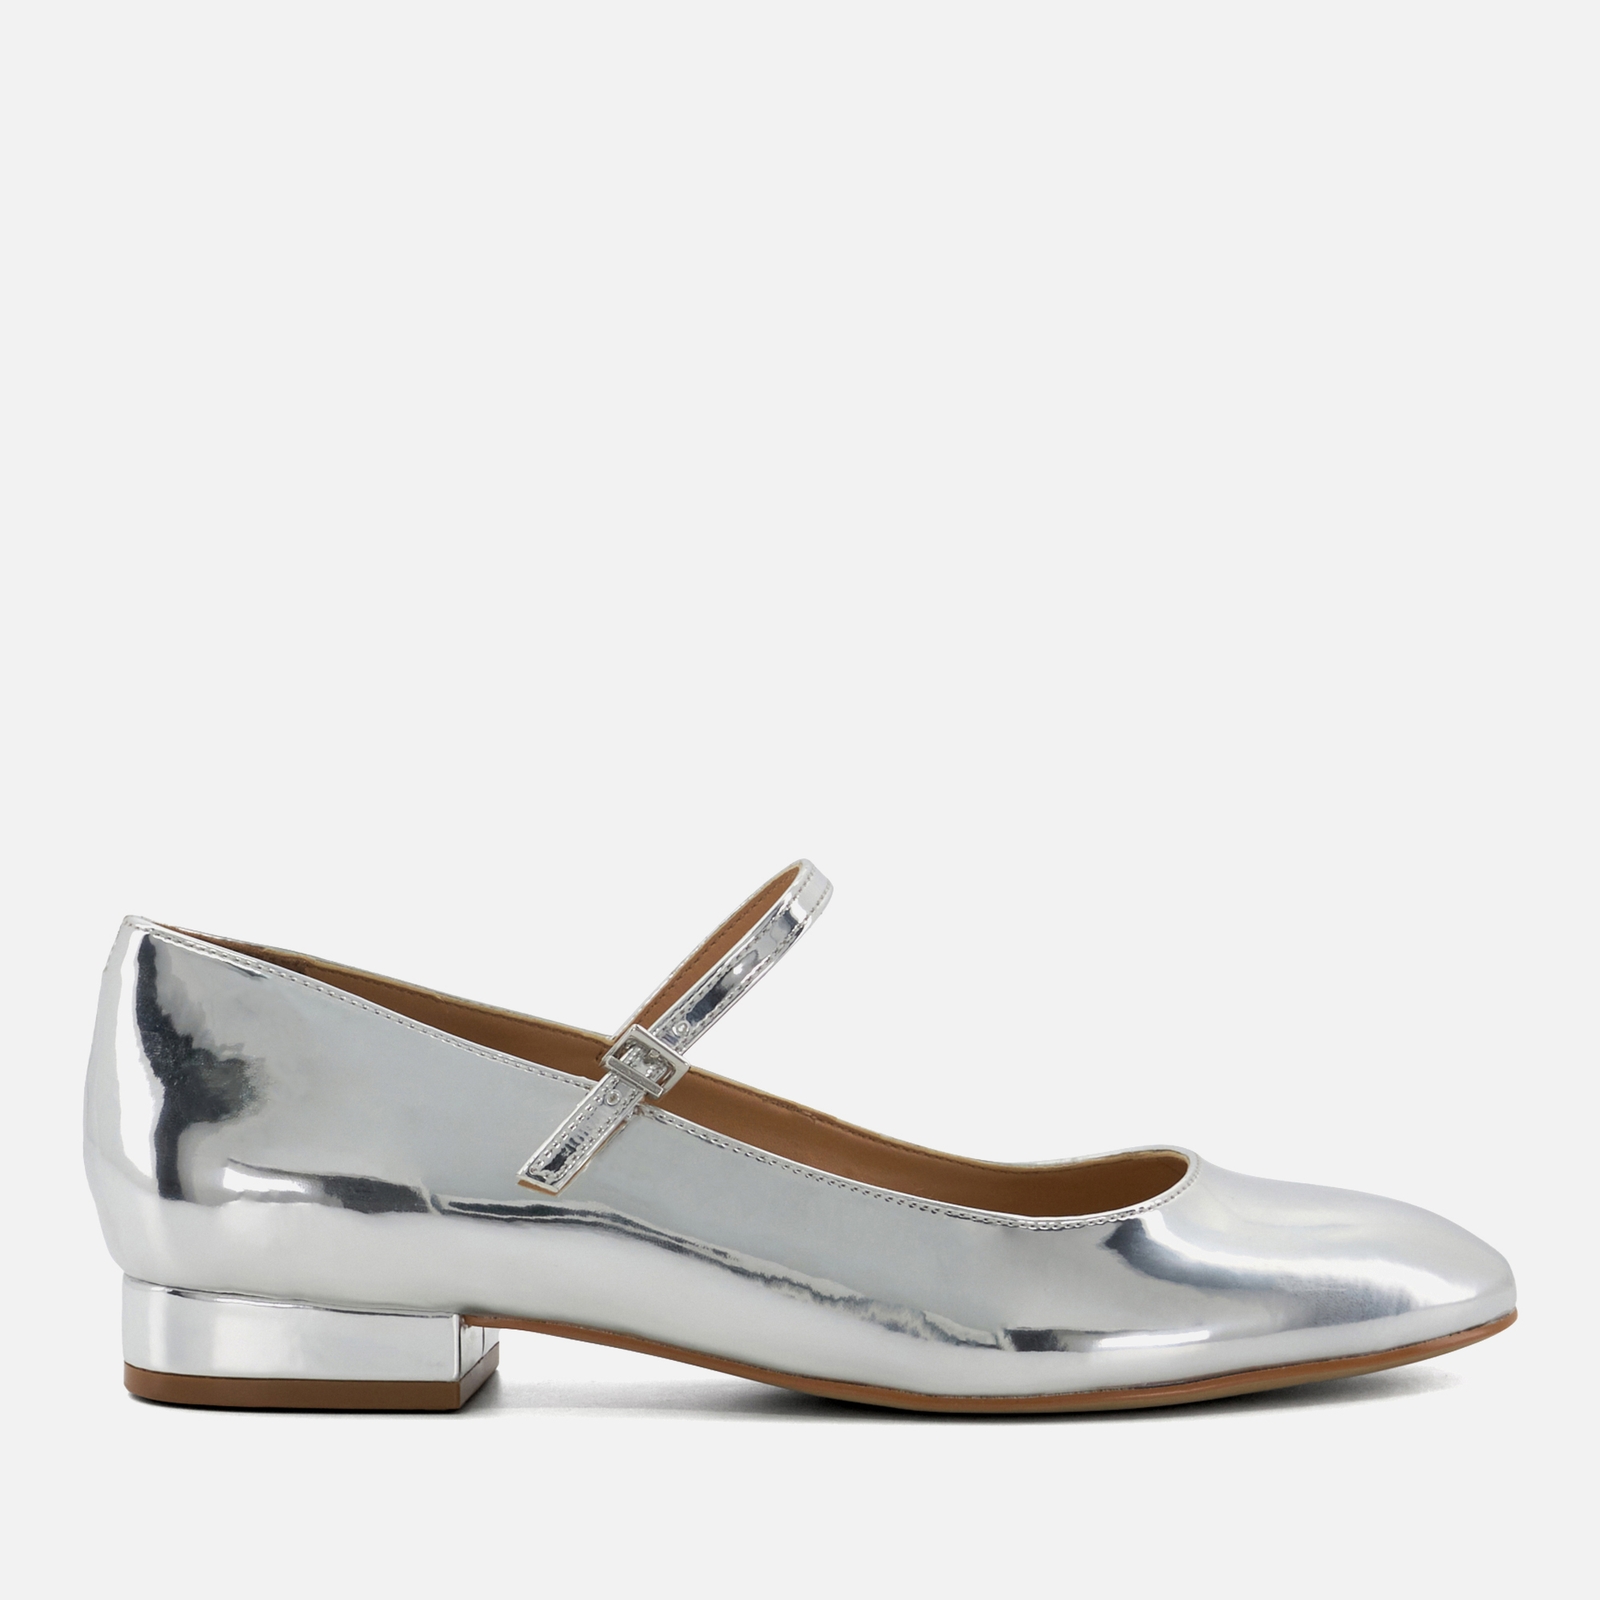 Dune Women's Hipplie Patent-Leather Mary Jane Flats